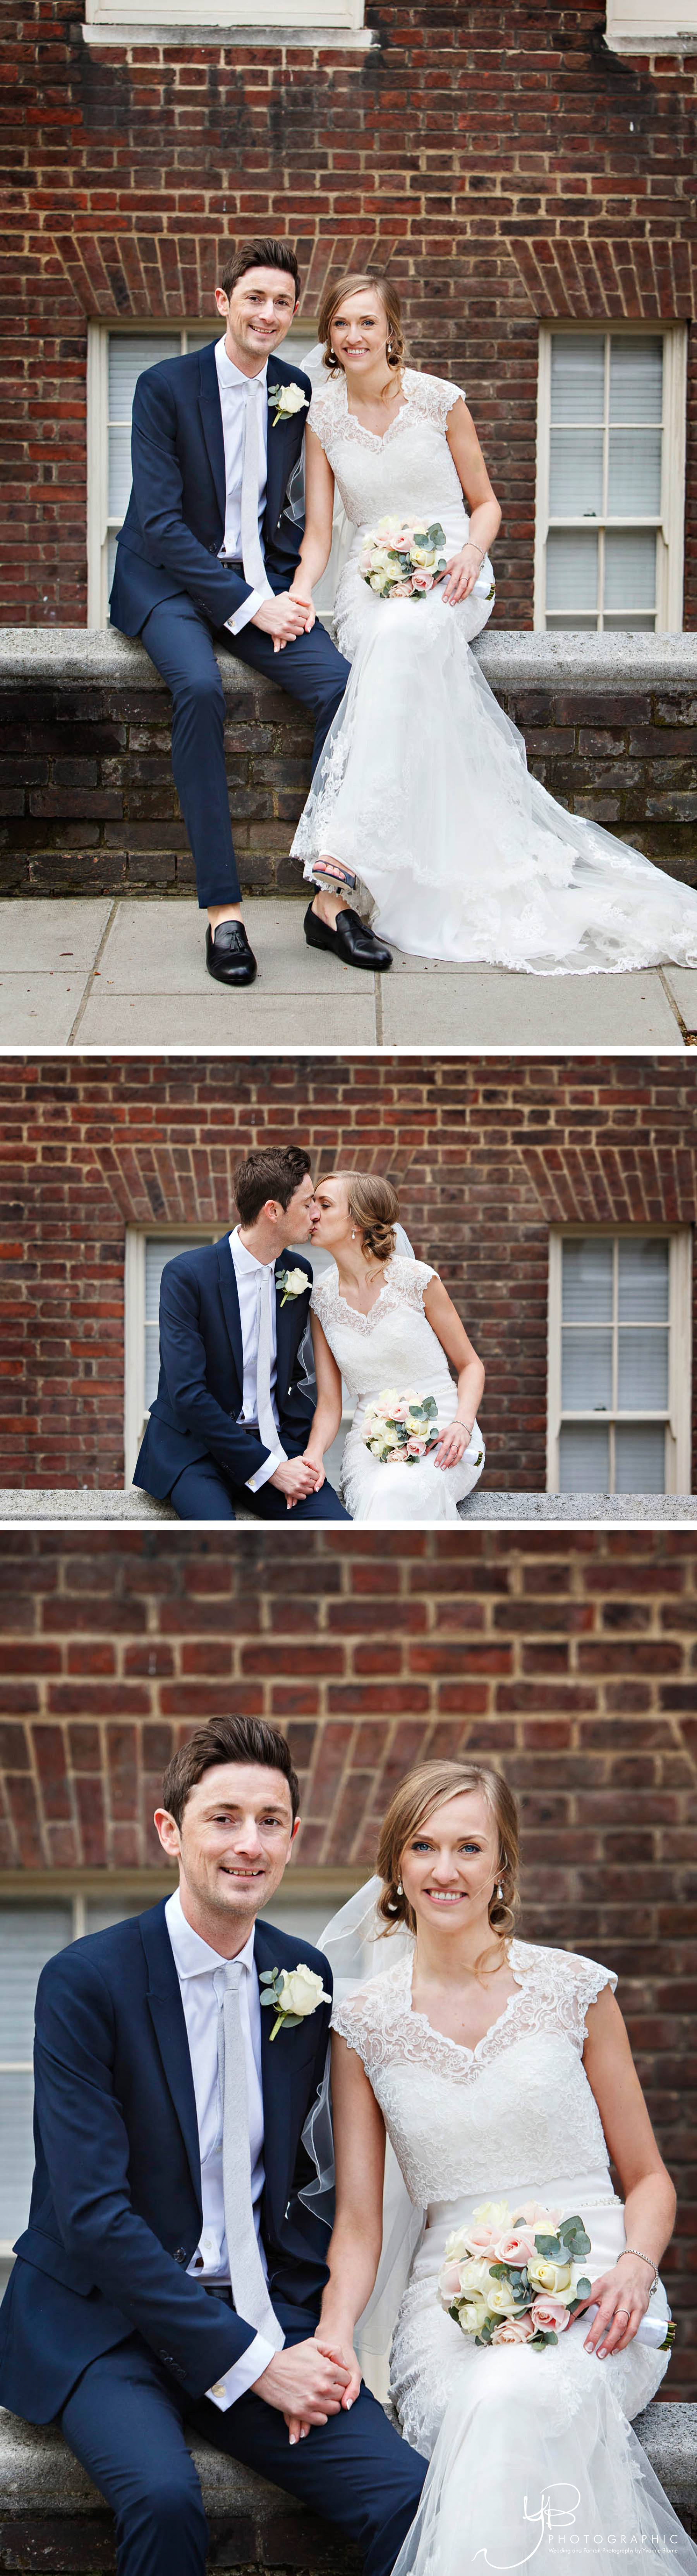 Cute and romantic wedding portraits in Chelsea